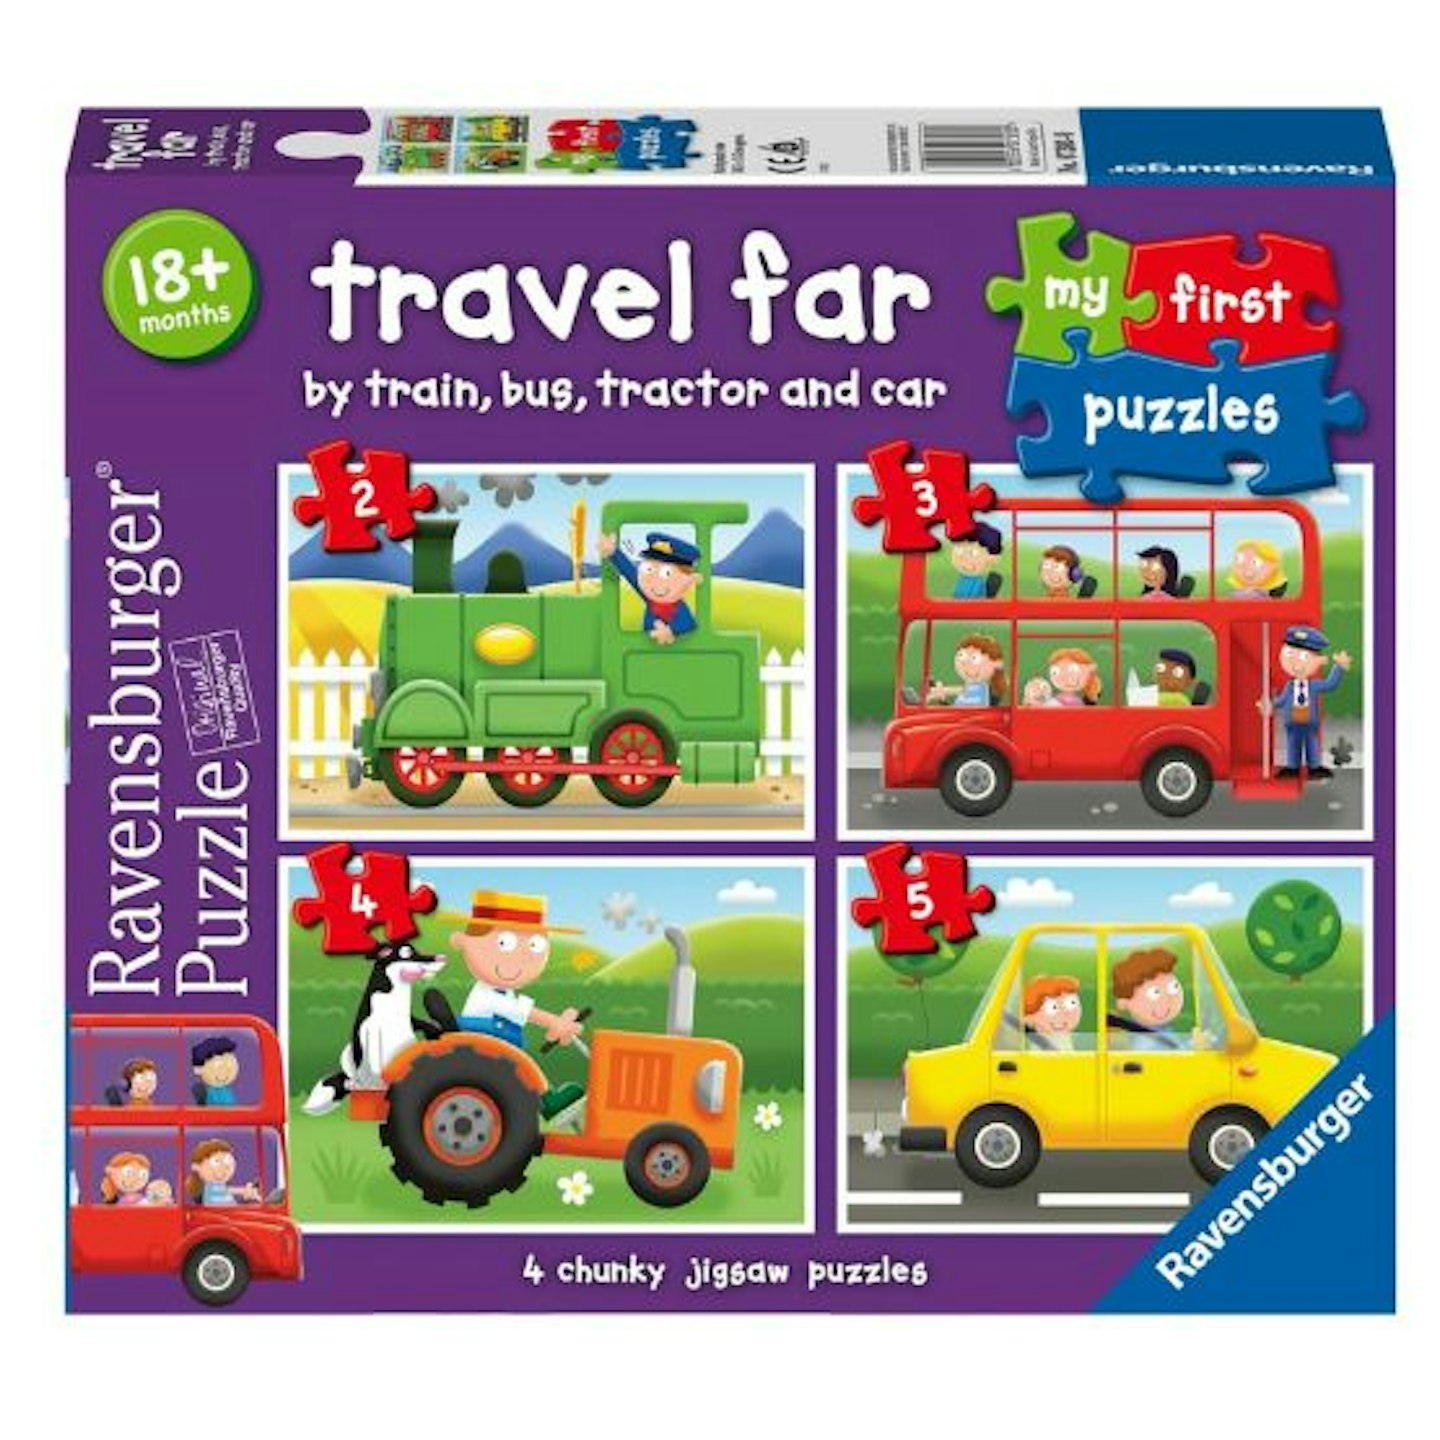 Ravensburger My First Puzzle, Travel Far